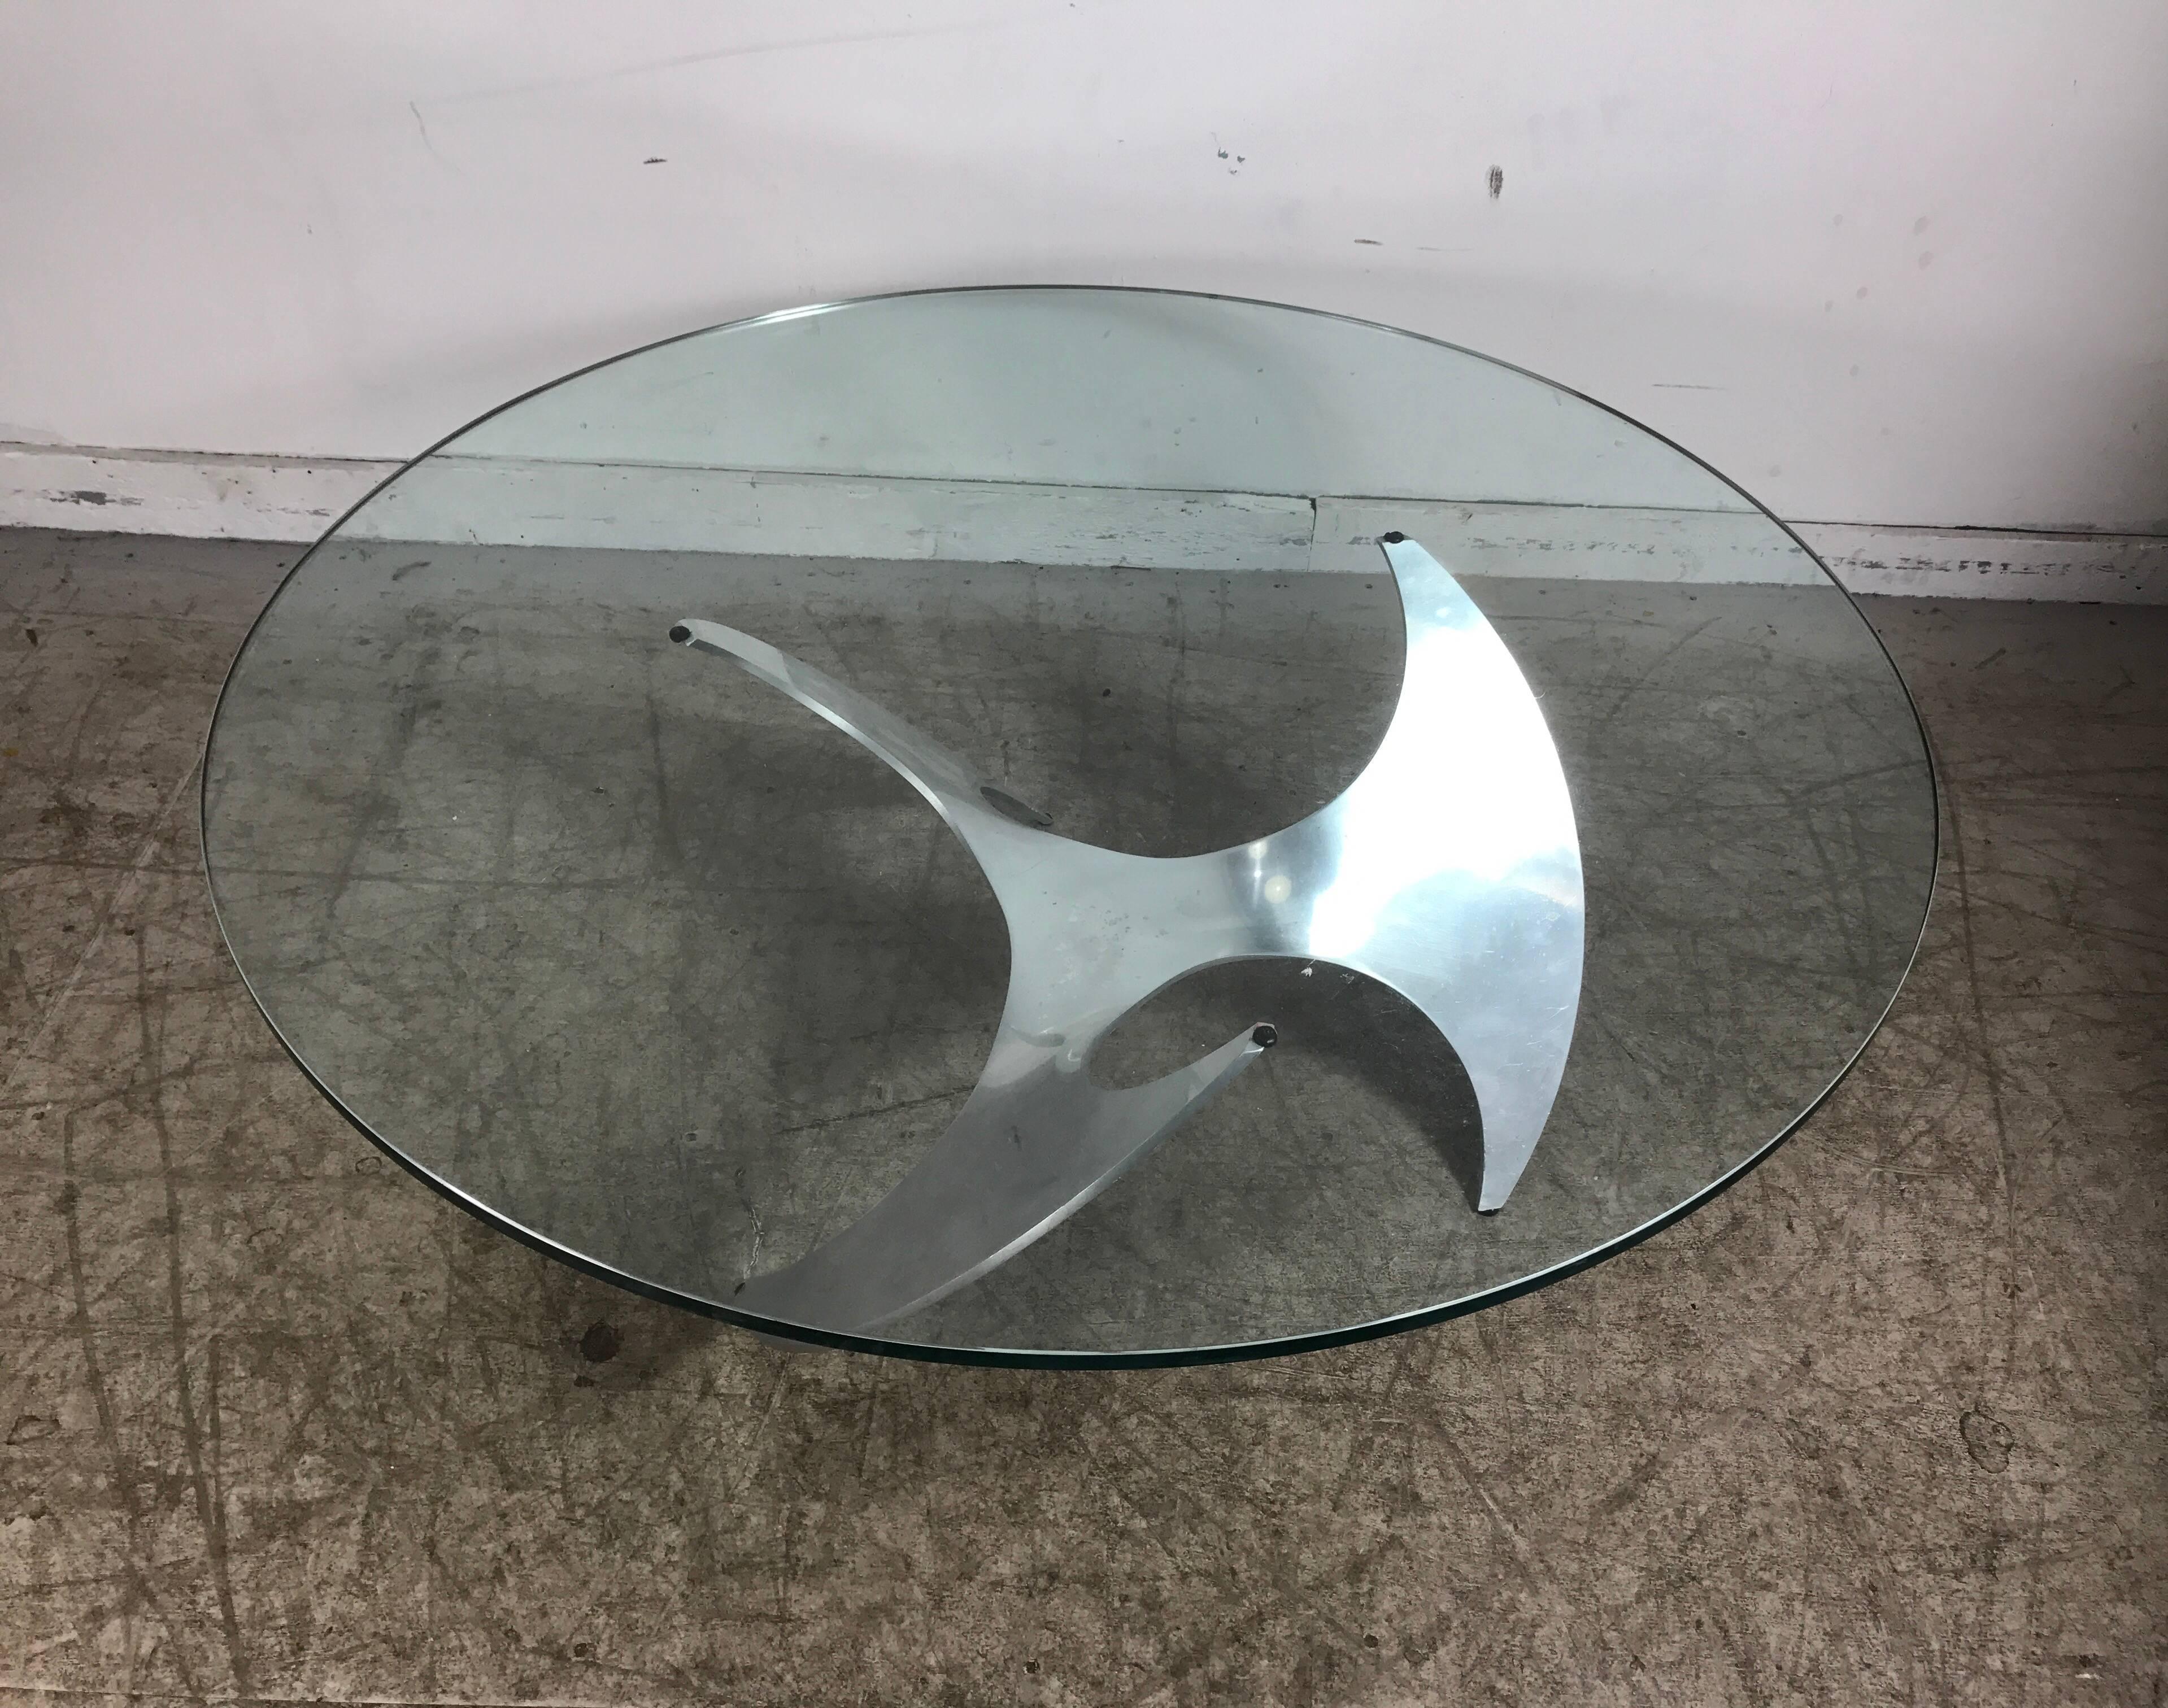 Modernist coffee table with cast alumimum propeller base Features 44 diameter, 1/2 inch thick round glass top. Designed by Knut Hesterberg. Hand delivery available to New York City or anywhere en route from Buffalo NY.